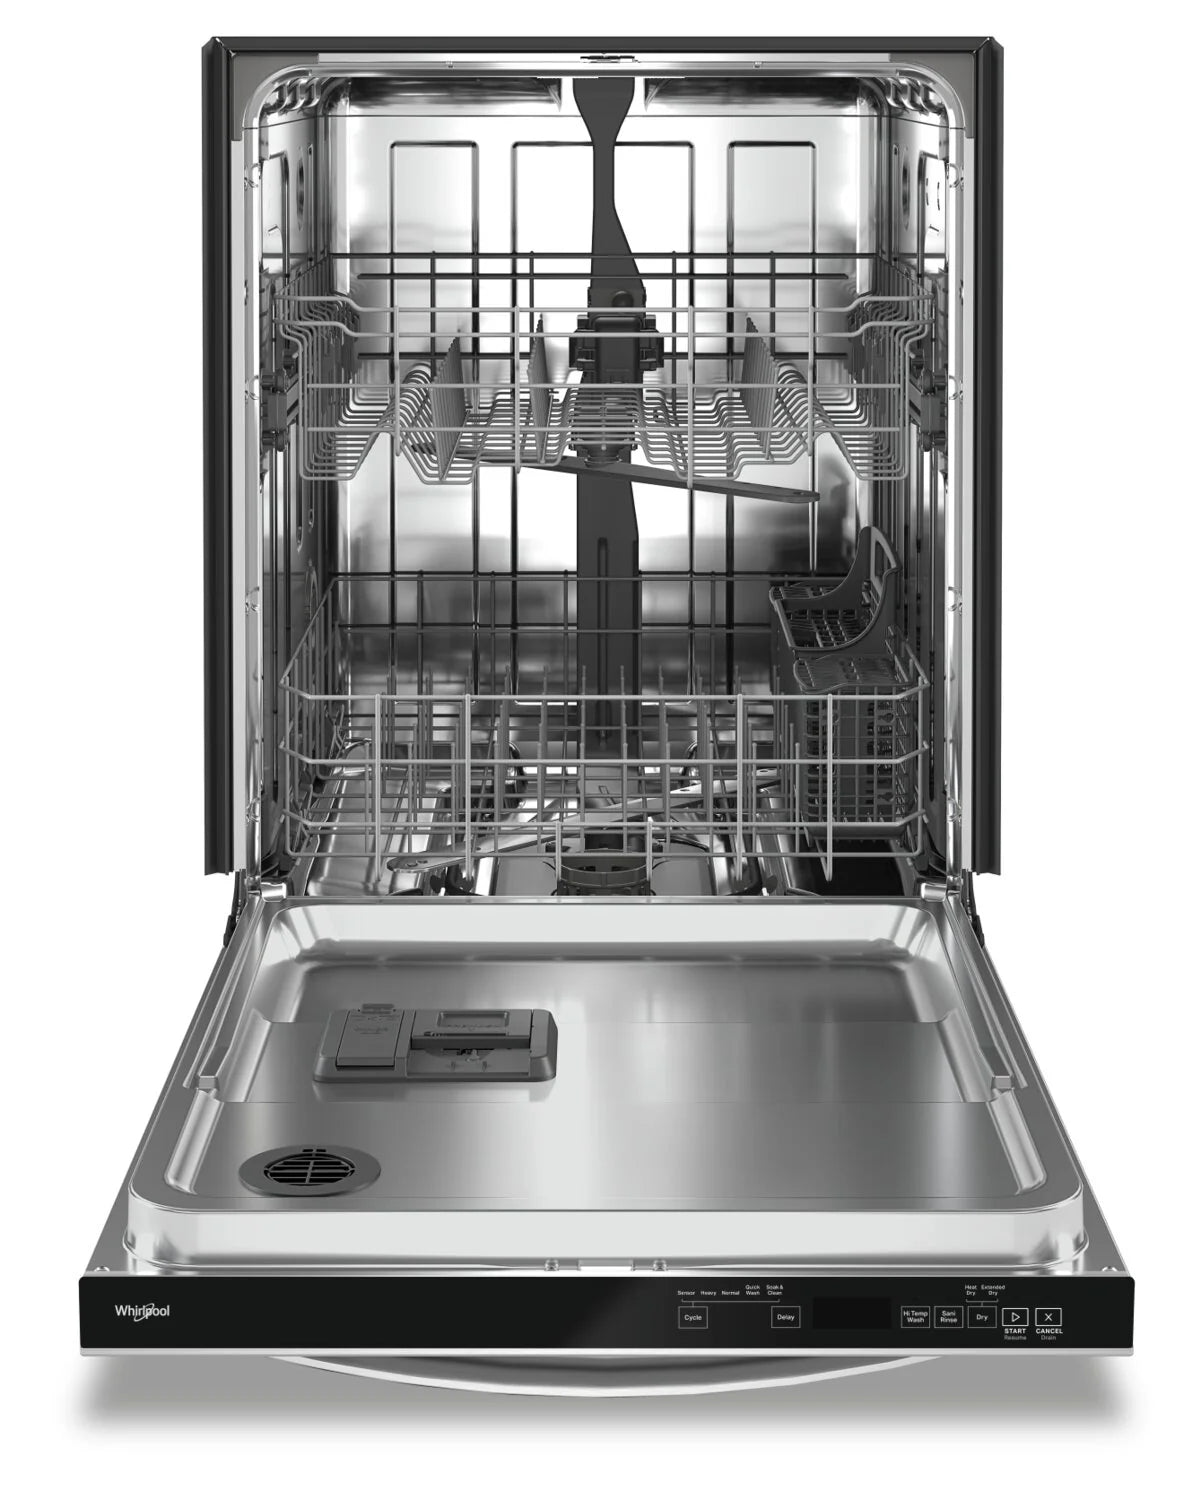 Large Capacity Dishwasher with Deep Top Rack